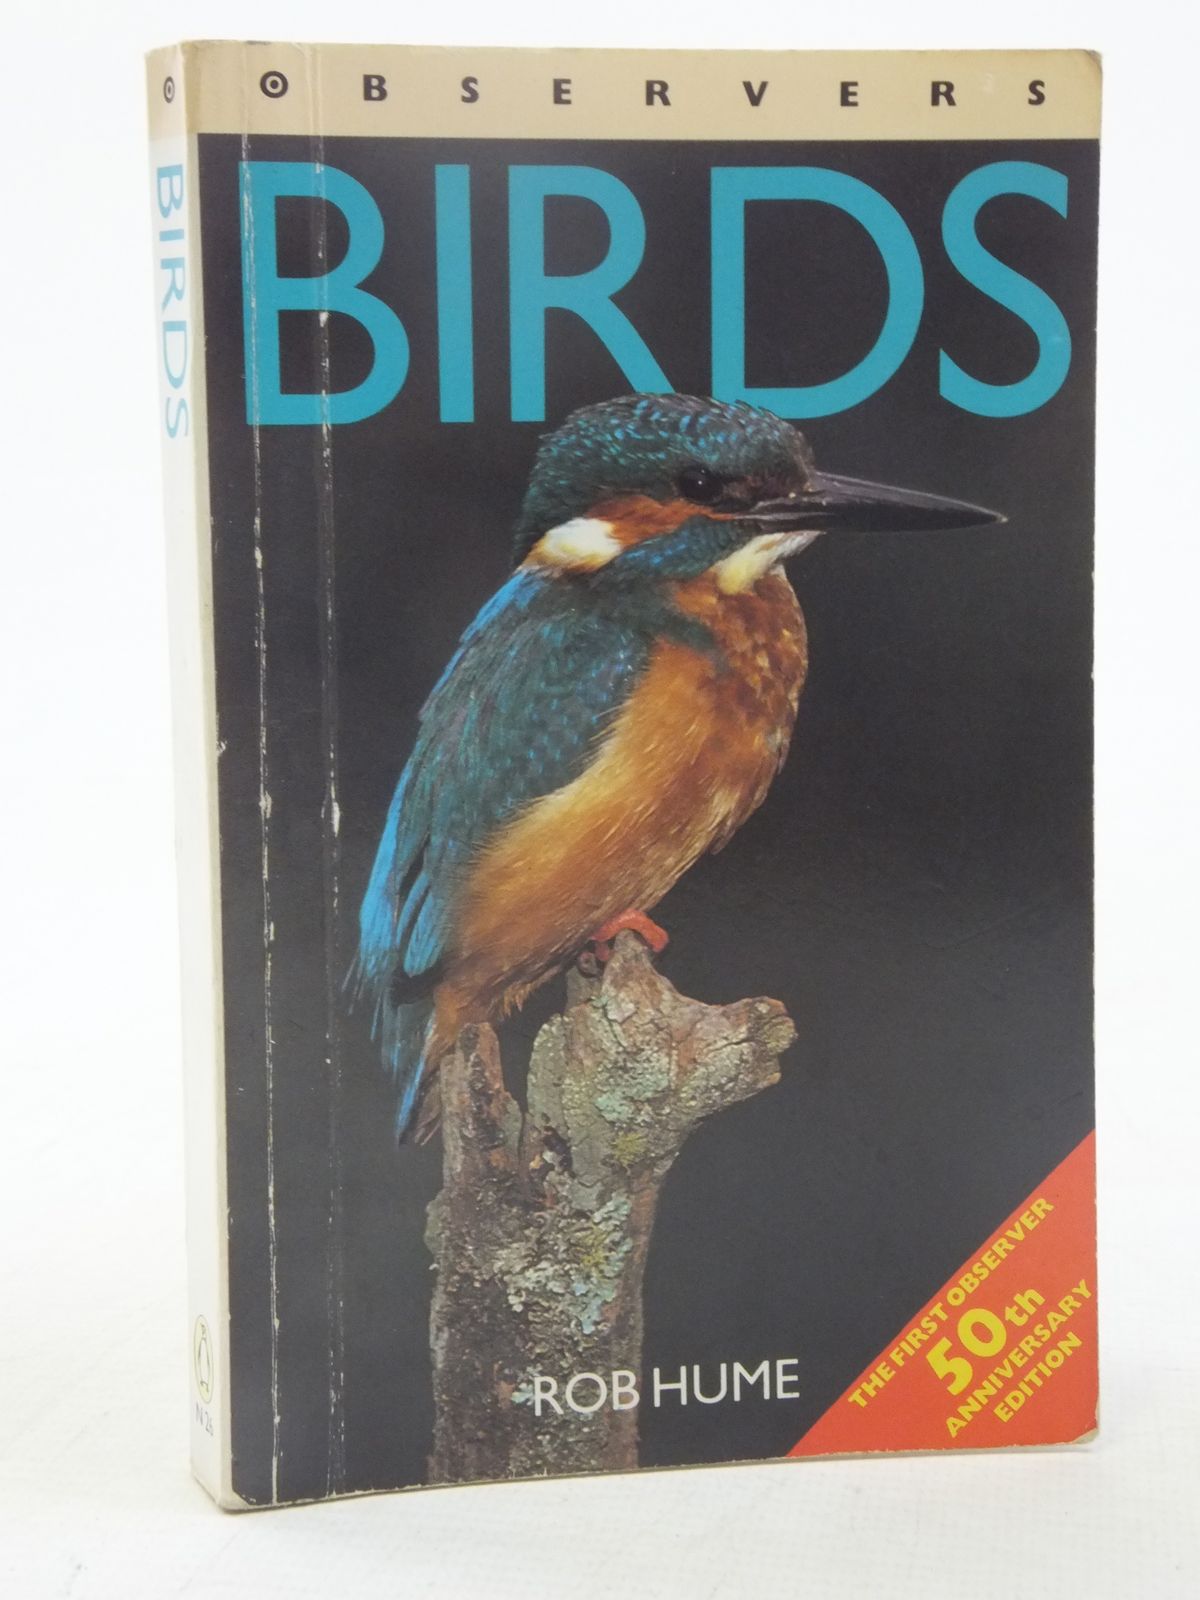 Photo of OBSERVERS BIRDS written by Hume, Rob published by Frederick Warne (STOCK CODE: 2118120)  for sale by Stella & Rose's Books